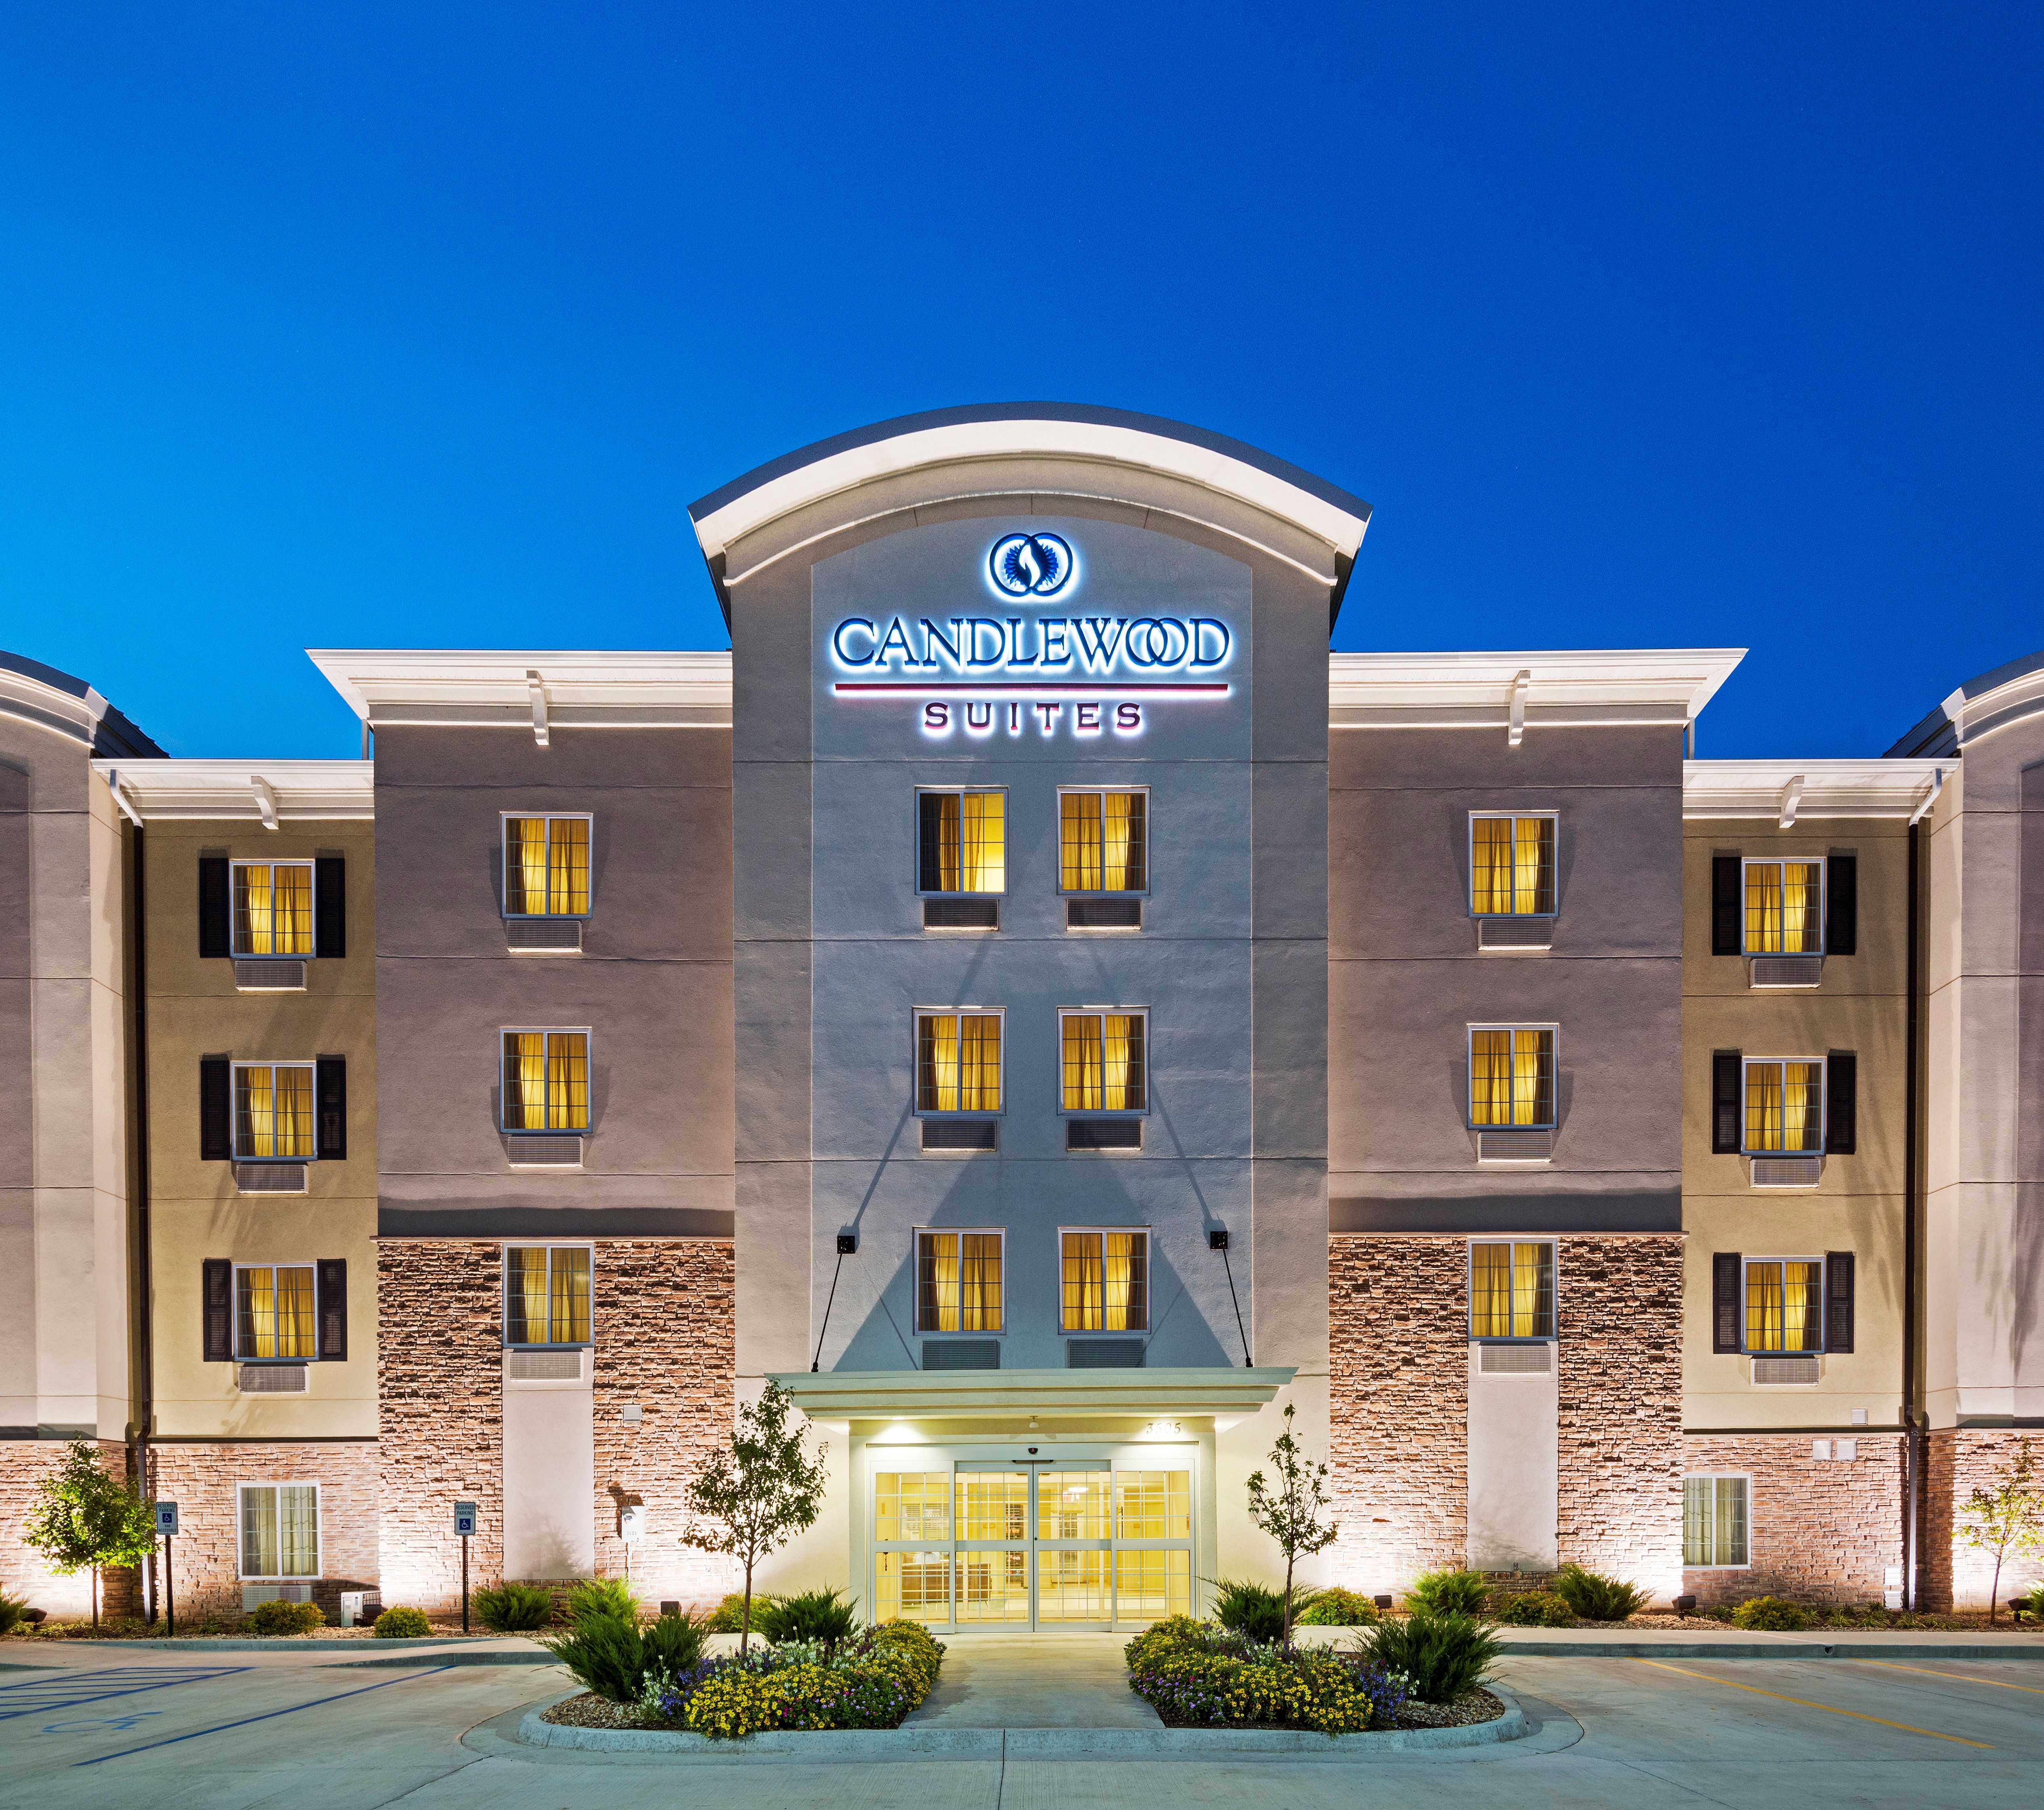 CANDLEWOOD SUITES LAKEWOOD 2⋆ ::: UNITED STATES ::: COMPARE HOTEL RATES